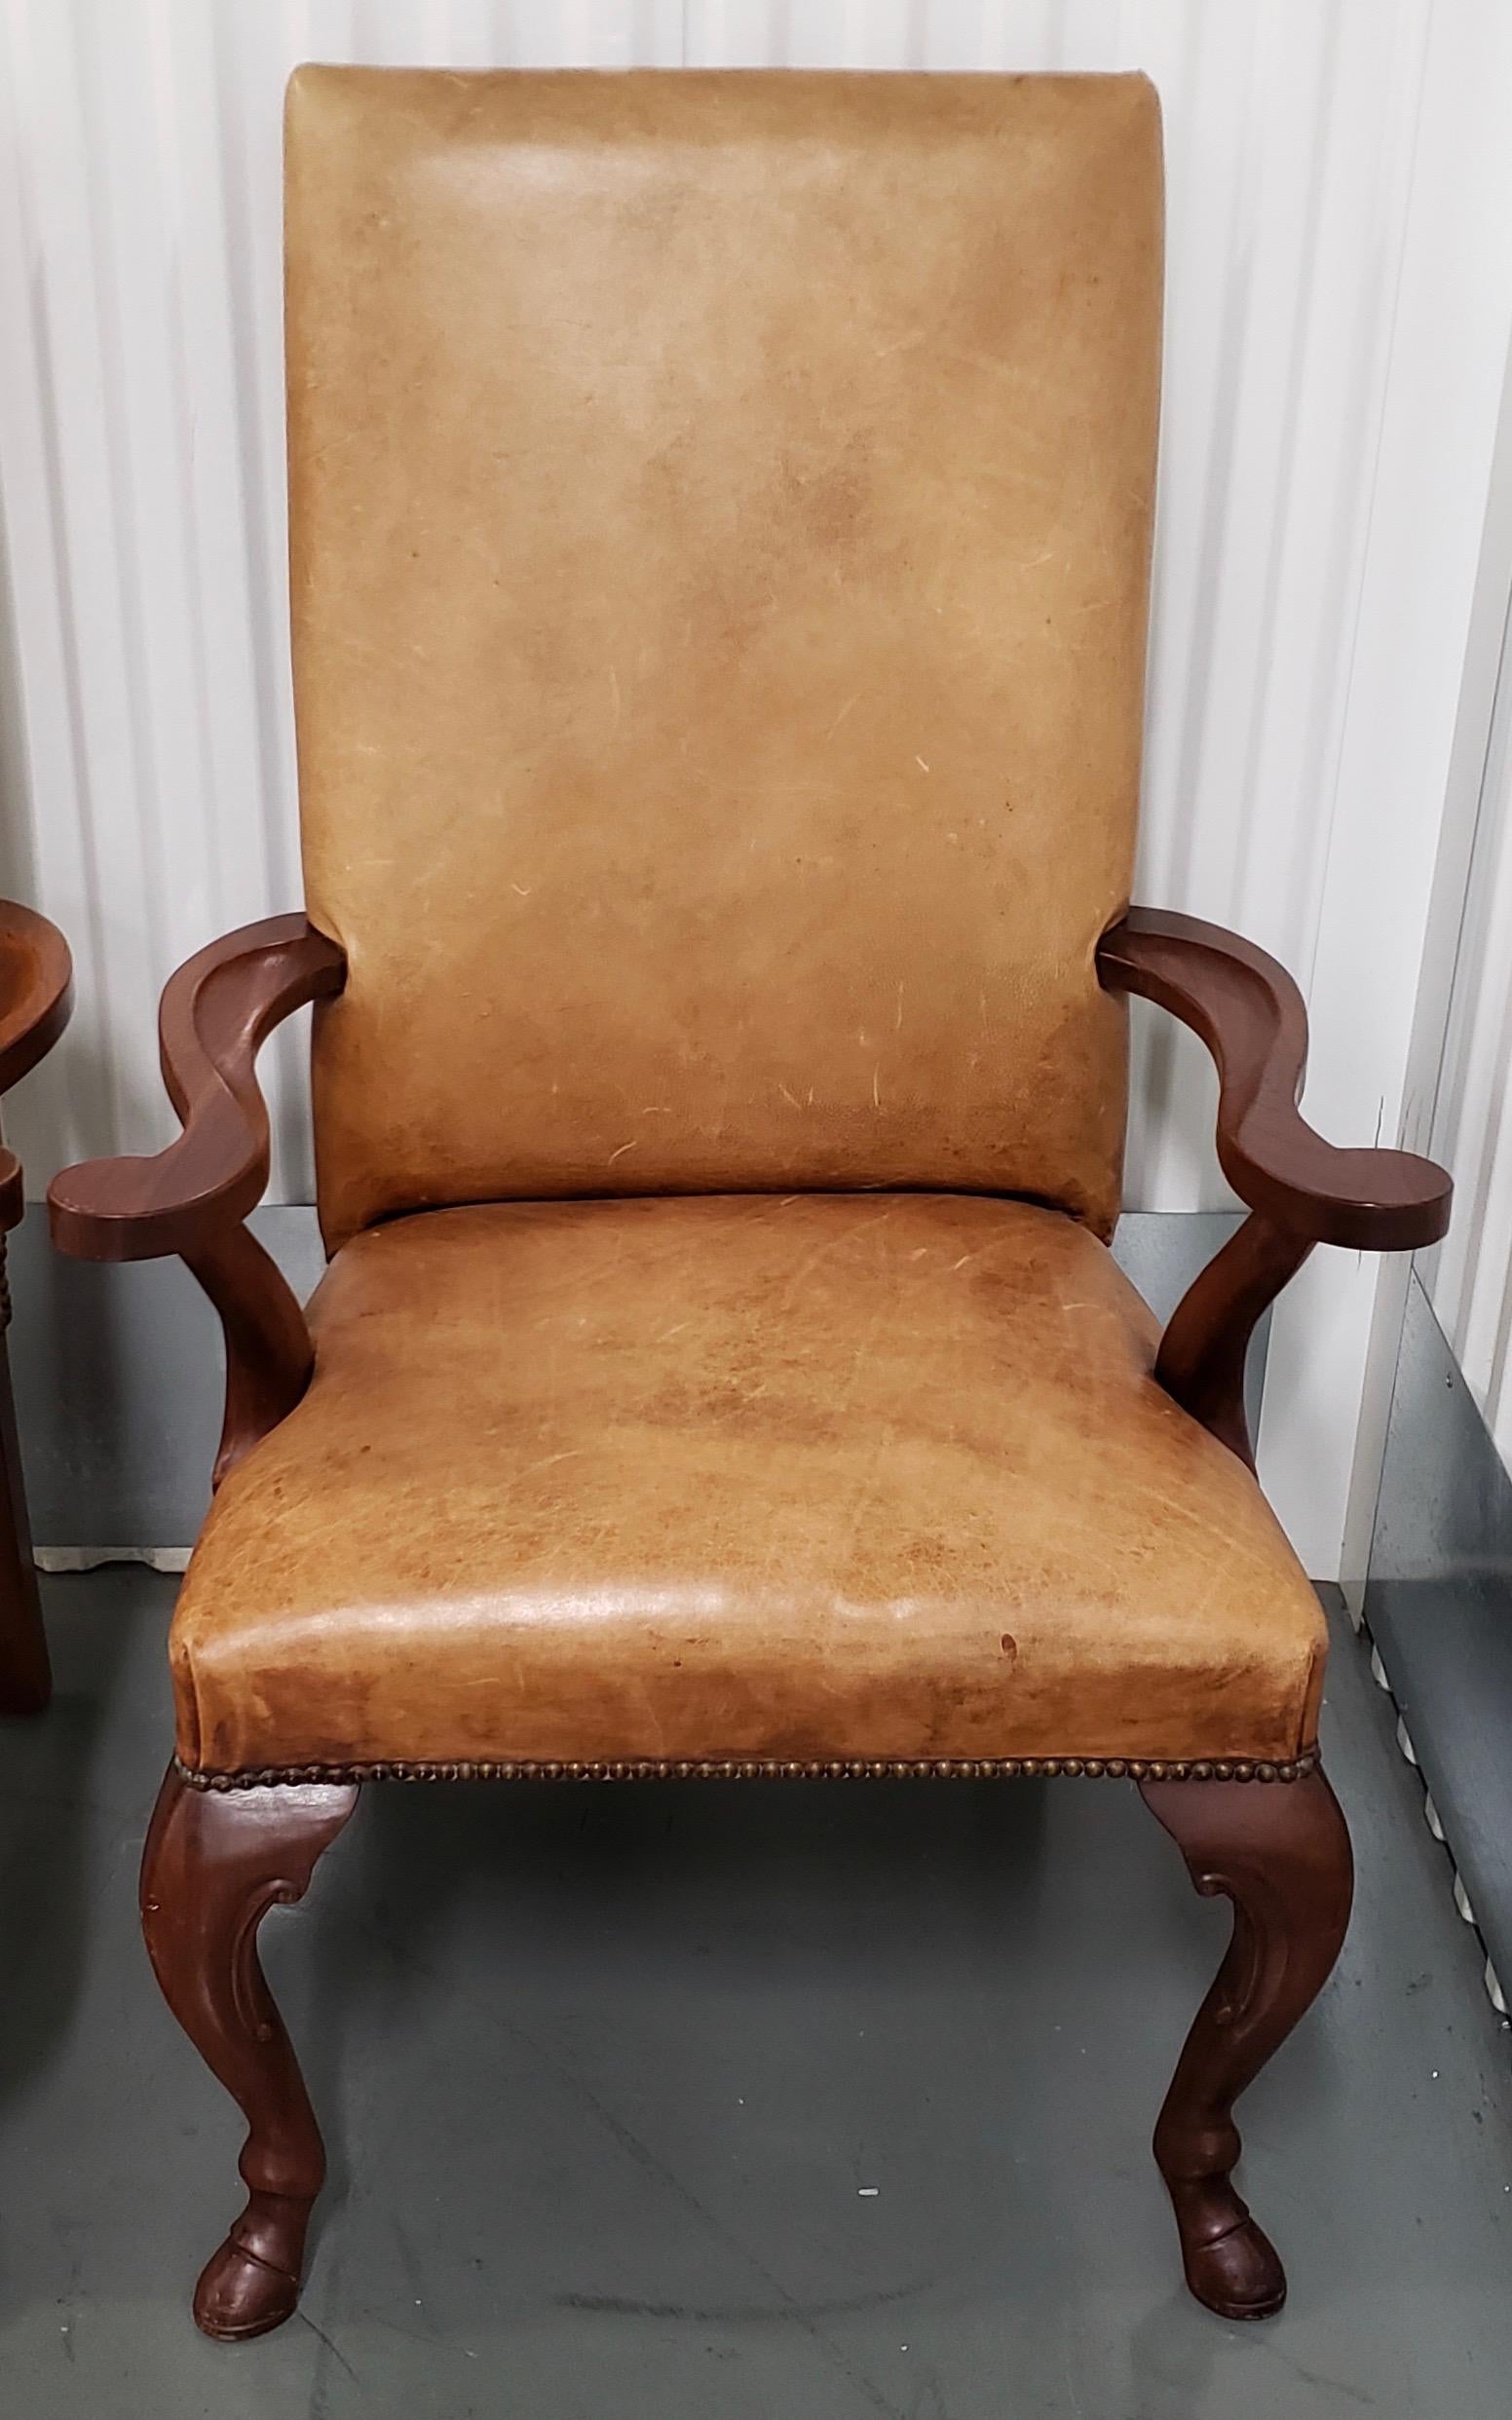 Ralph Lauren carved mahogany and leather upholstered armchairs with hoofed feet

Fantastic pair of carved mahogany arm chairs by Ralph Lauren. 

The leather is affixed to the frames with brass tacks.

Dimensions 28.75